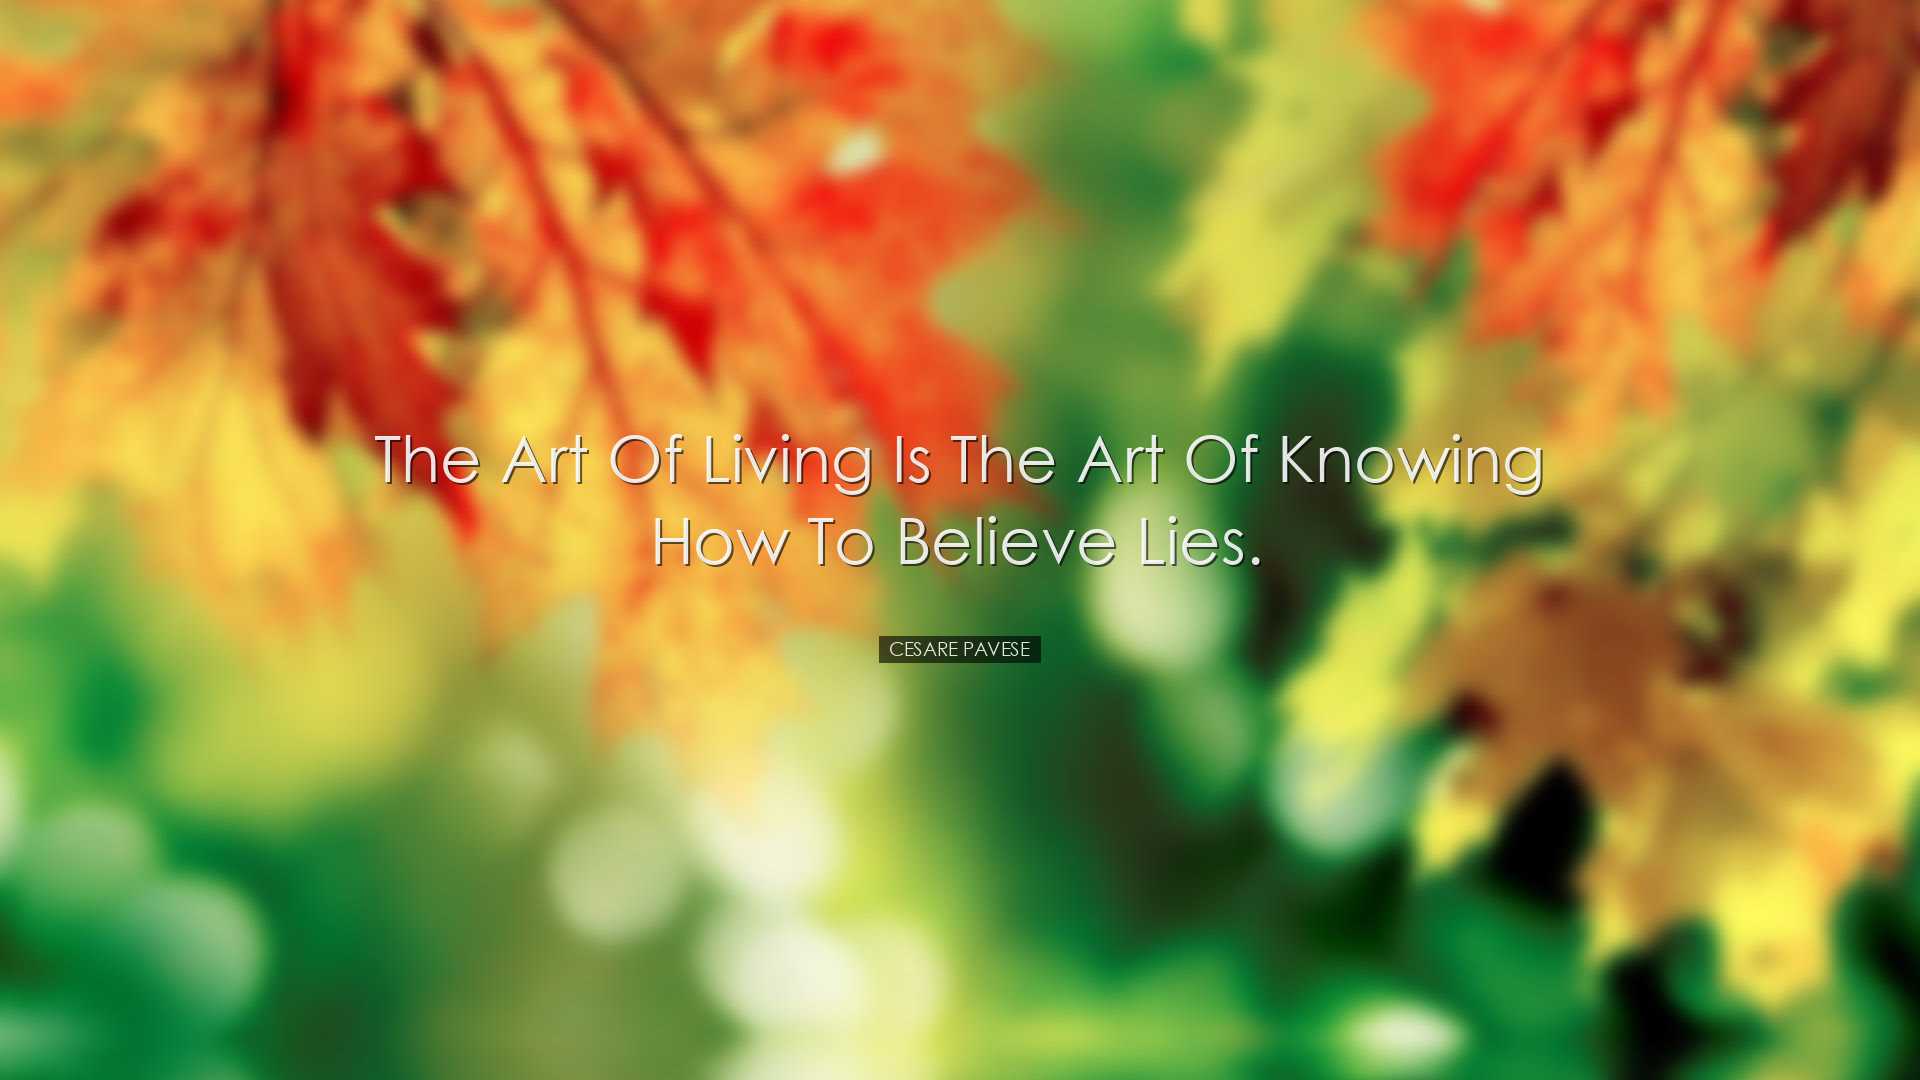 The art of living is the art of knowing how to believe lies. - Ces